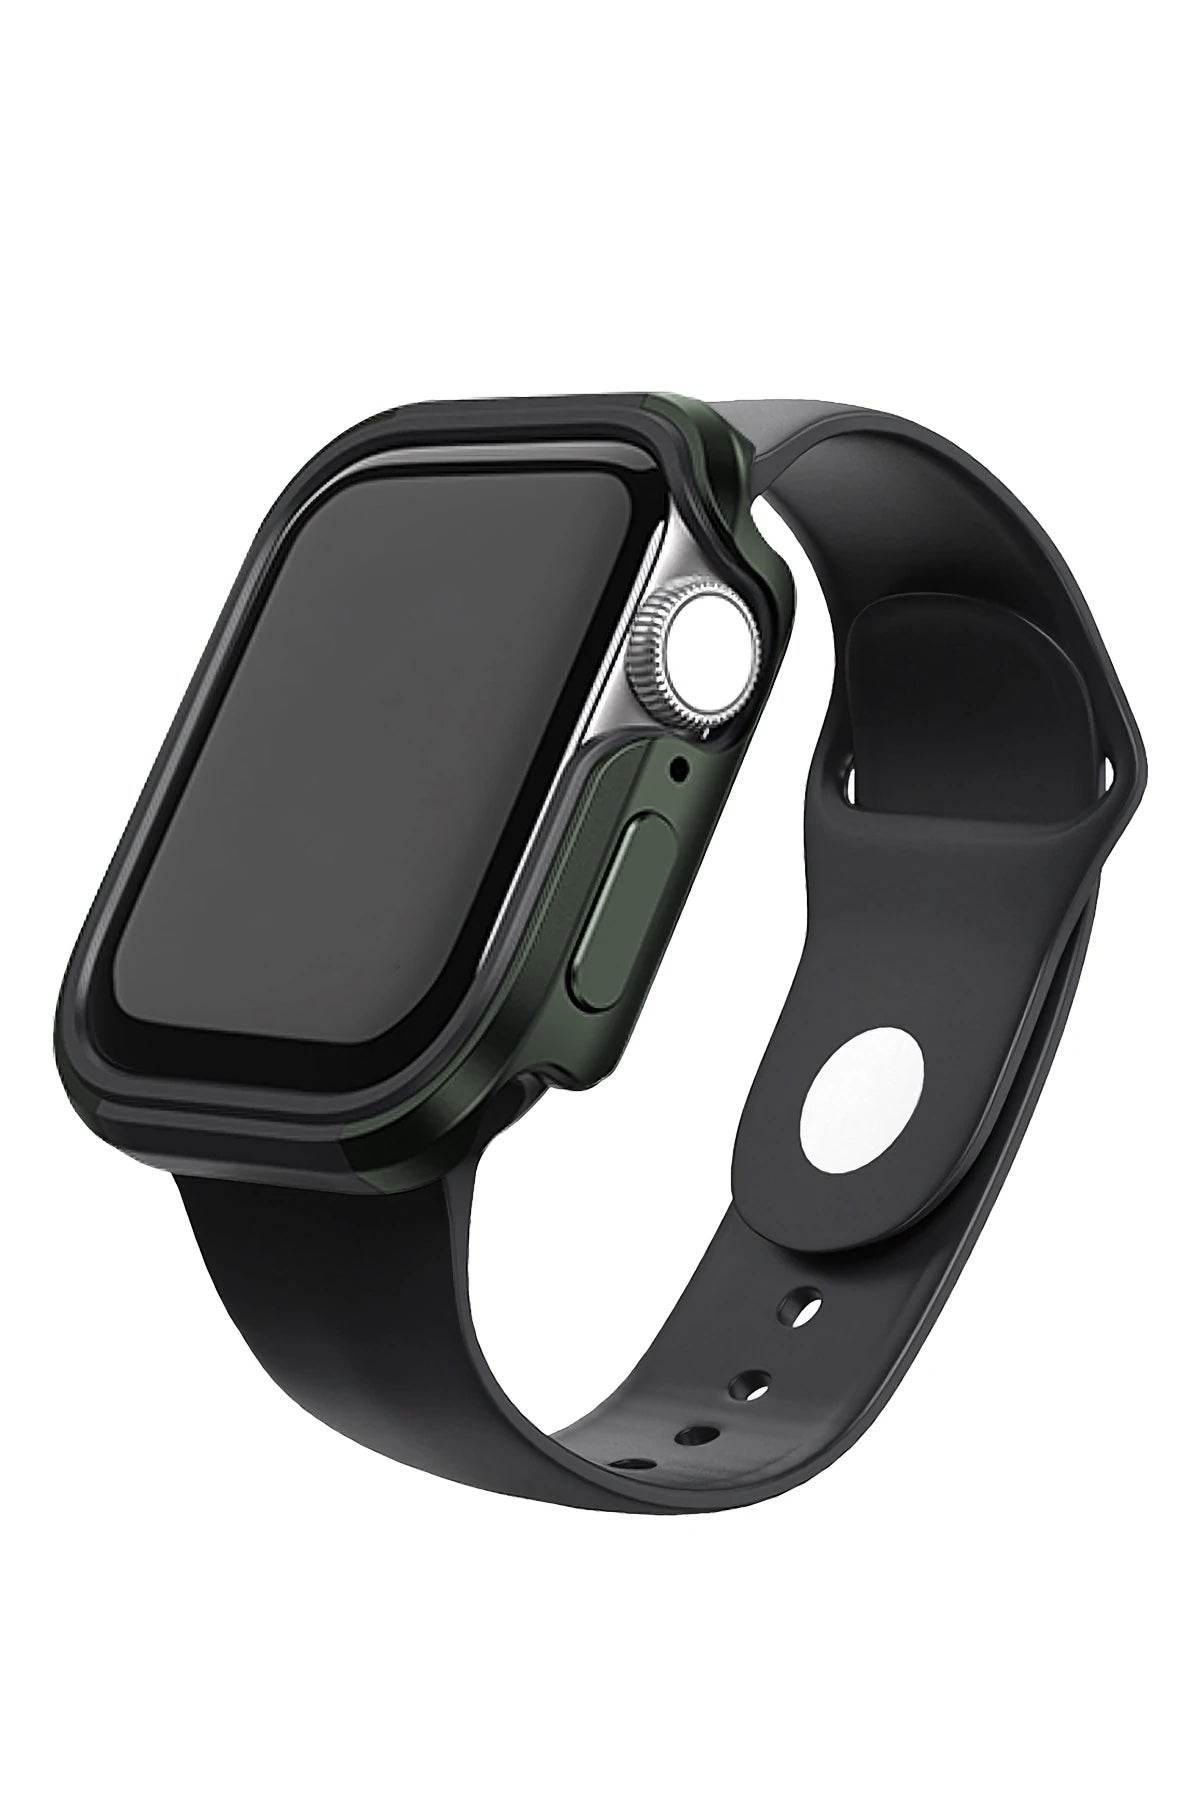 Wiwu Defense Apple Watch Compatible Case Protector Green 